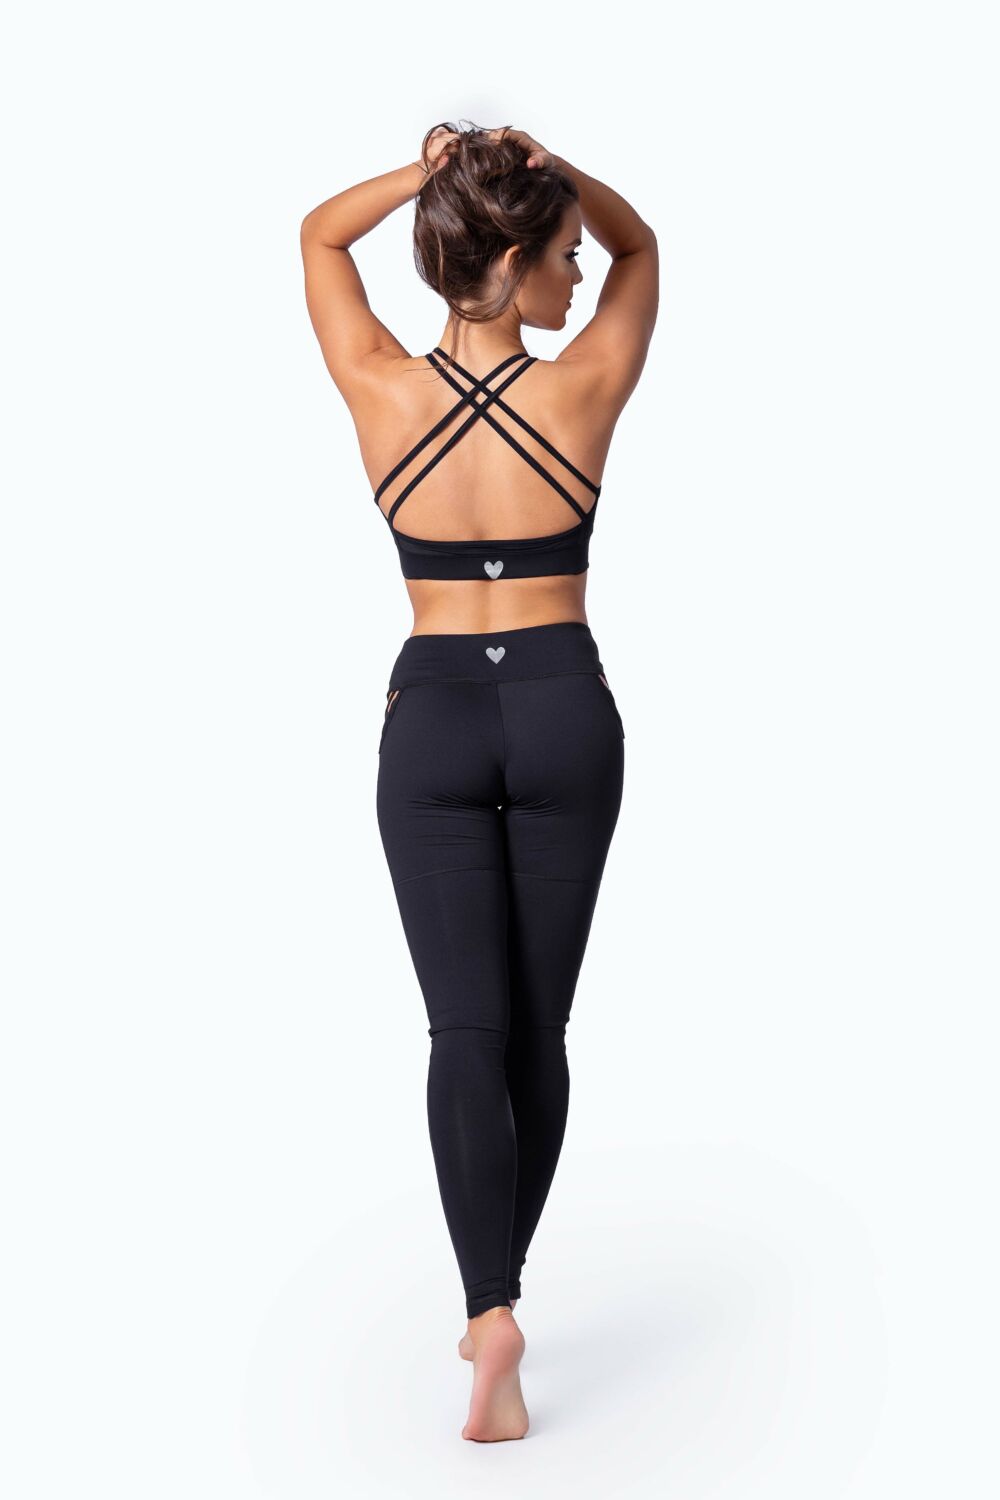 Indigostyle fitness top – Cross